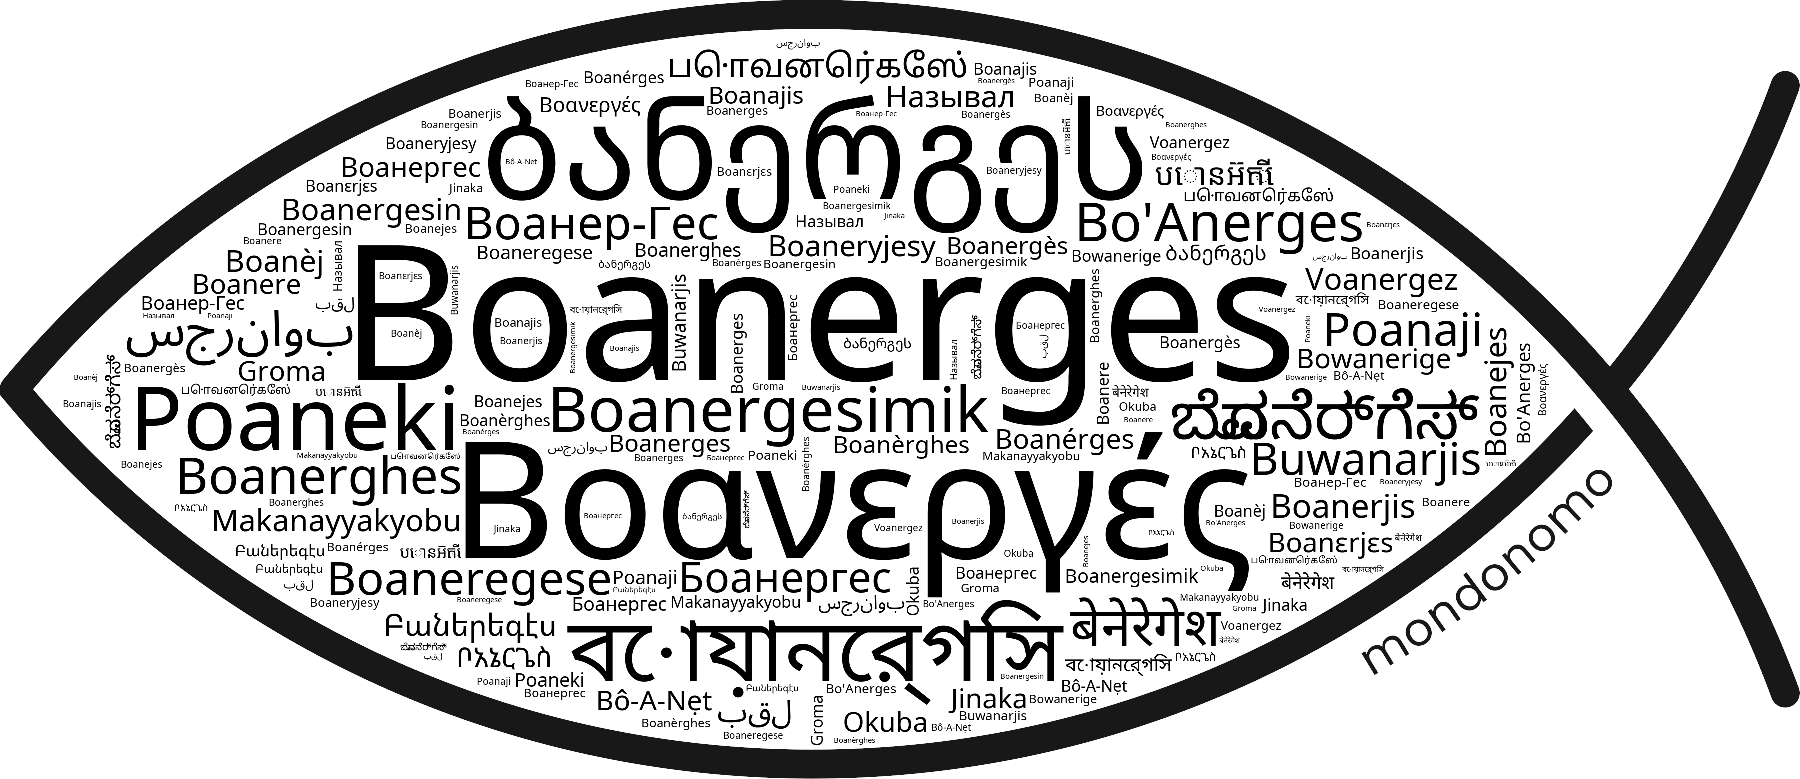 Name Boanerges in the world's Bibles